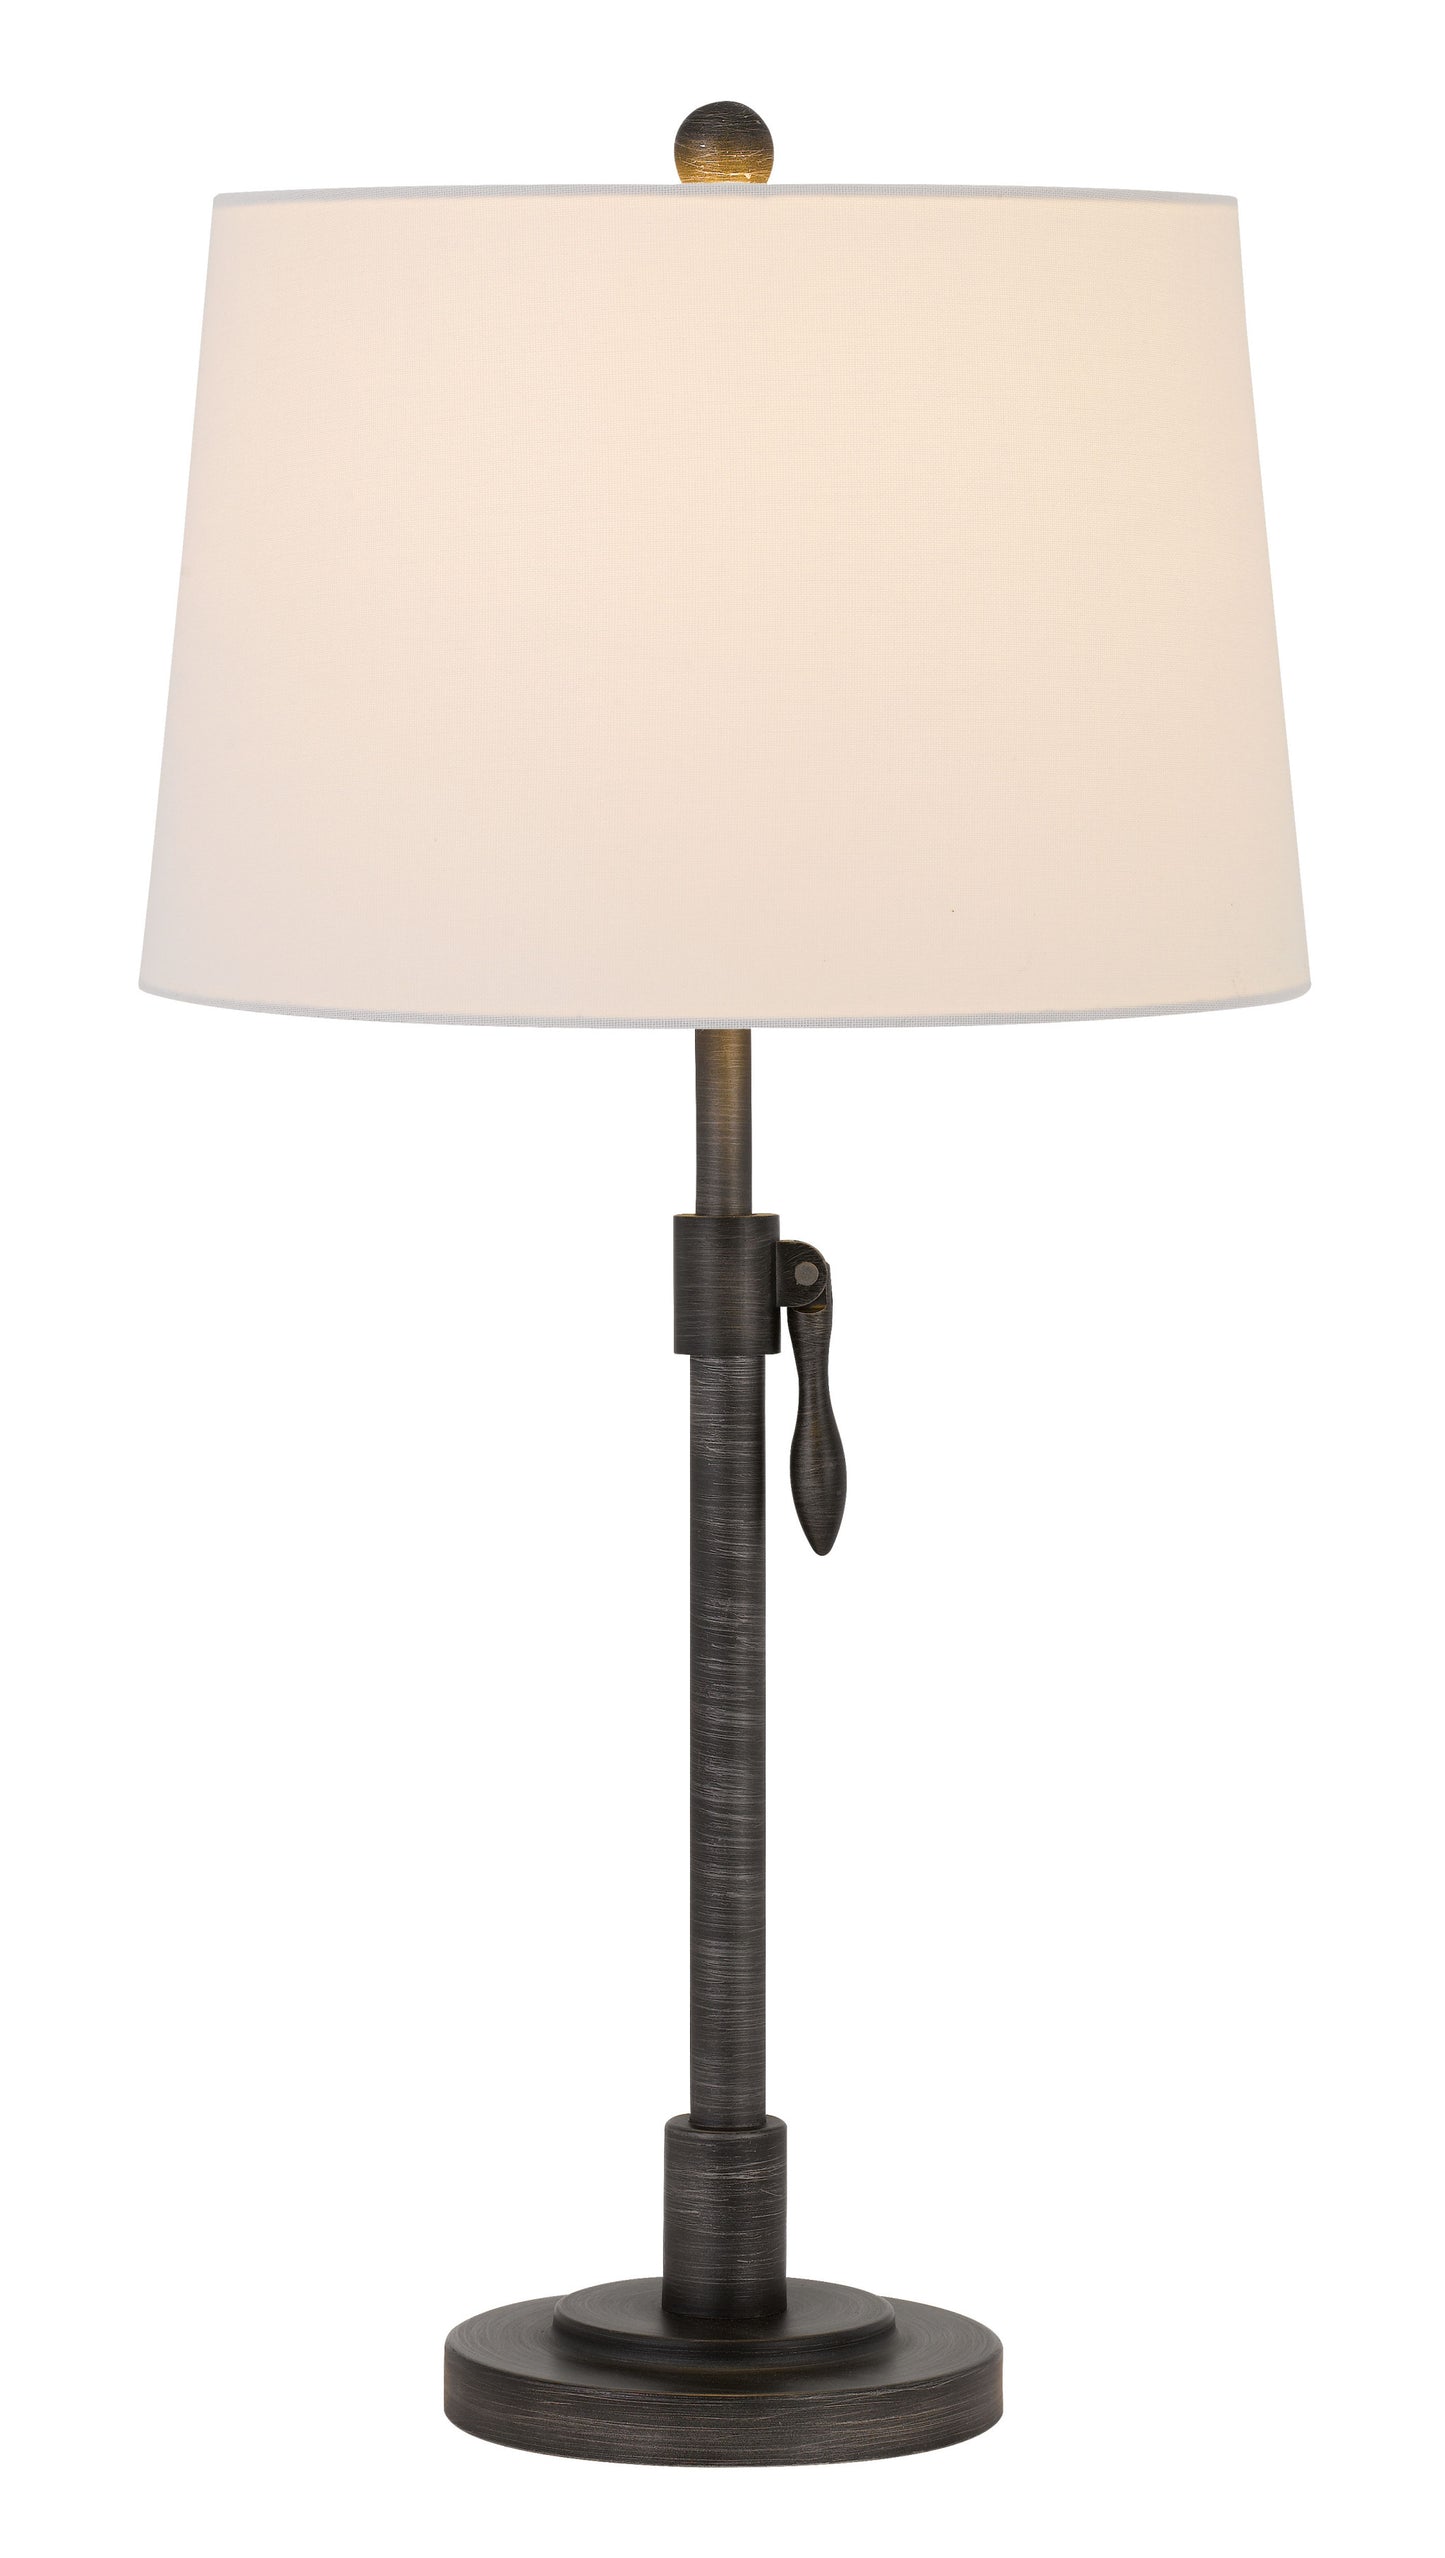 30" Silver Metal Adjustable Table Lamp With Off White Empire Shade